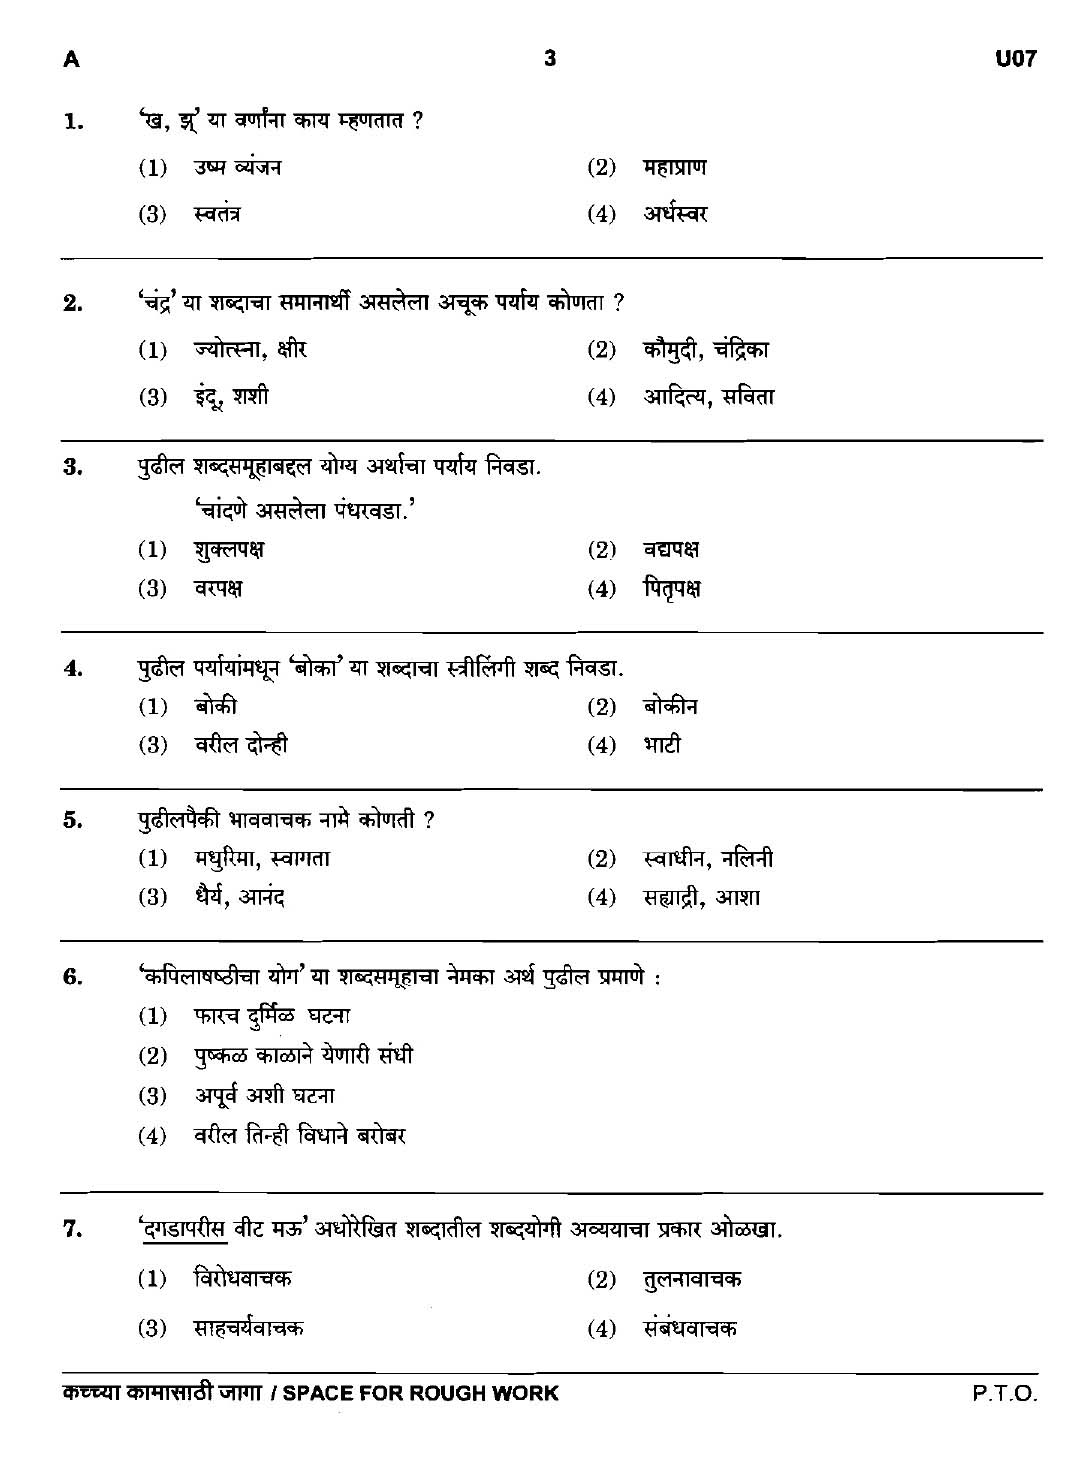 MPSC Agricultural Services Preliminary Exam 2016 Question Paper 2